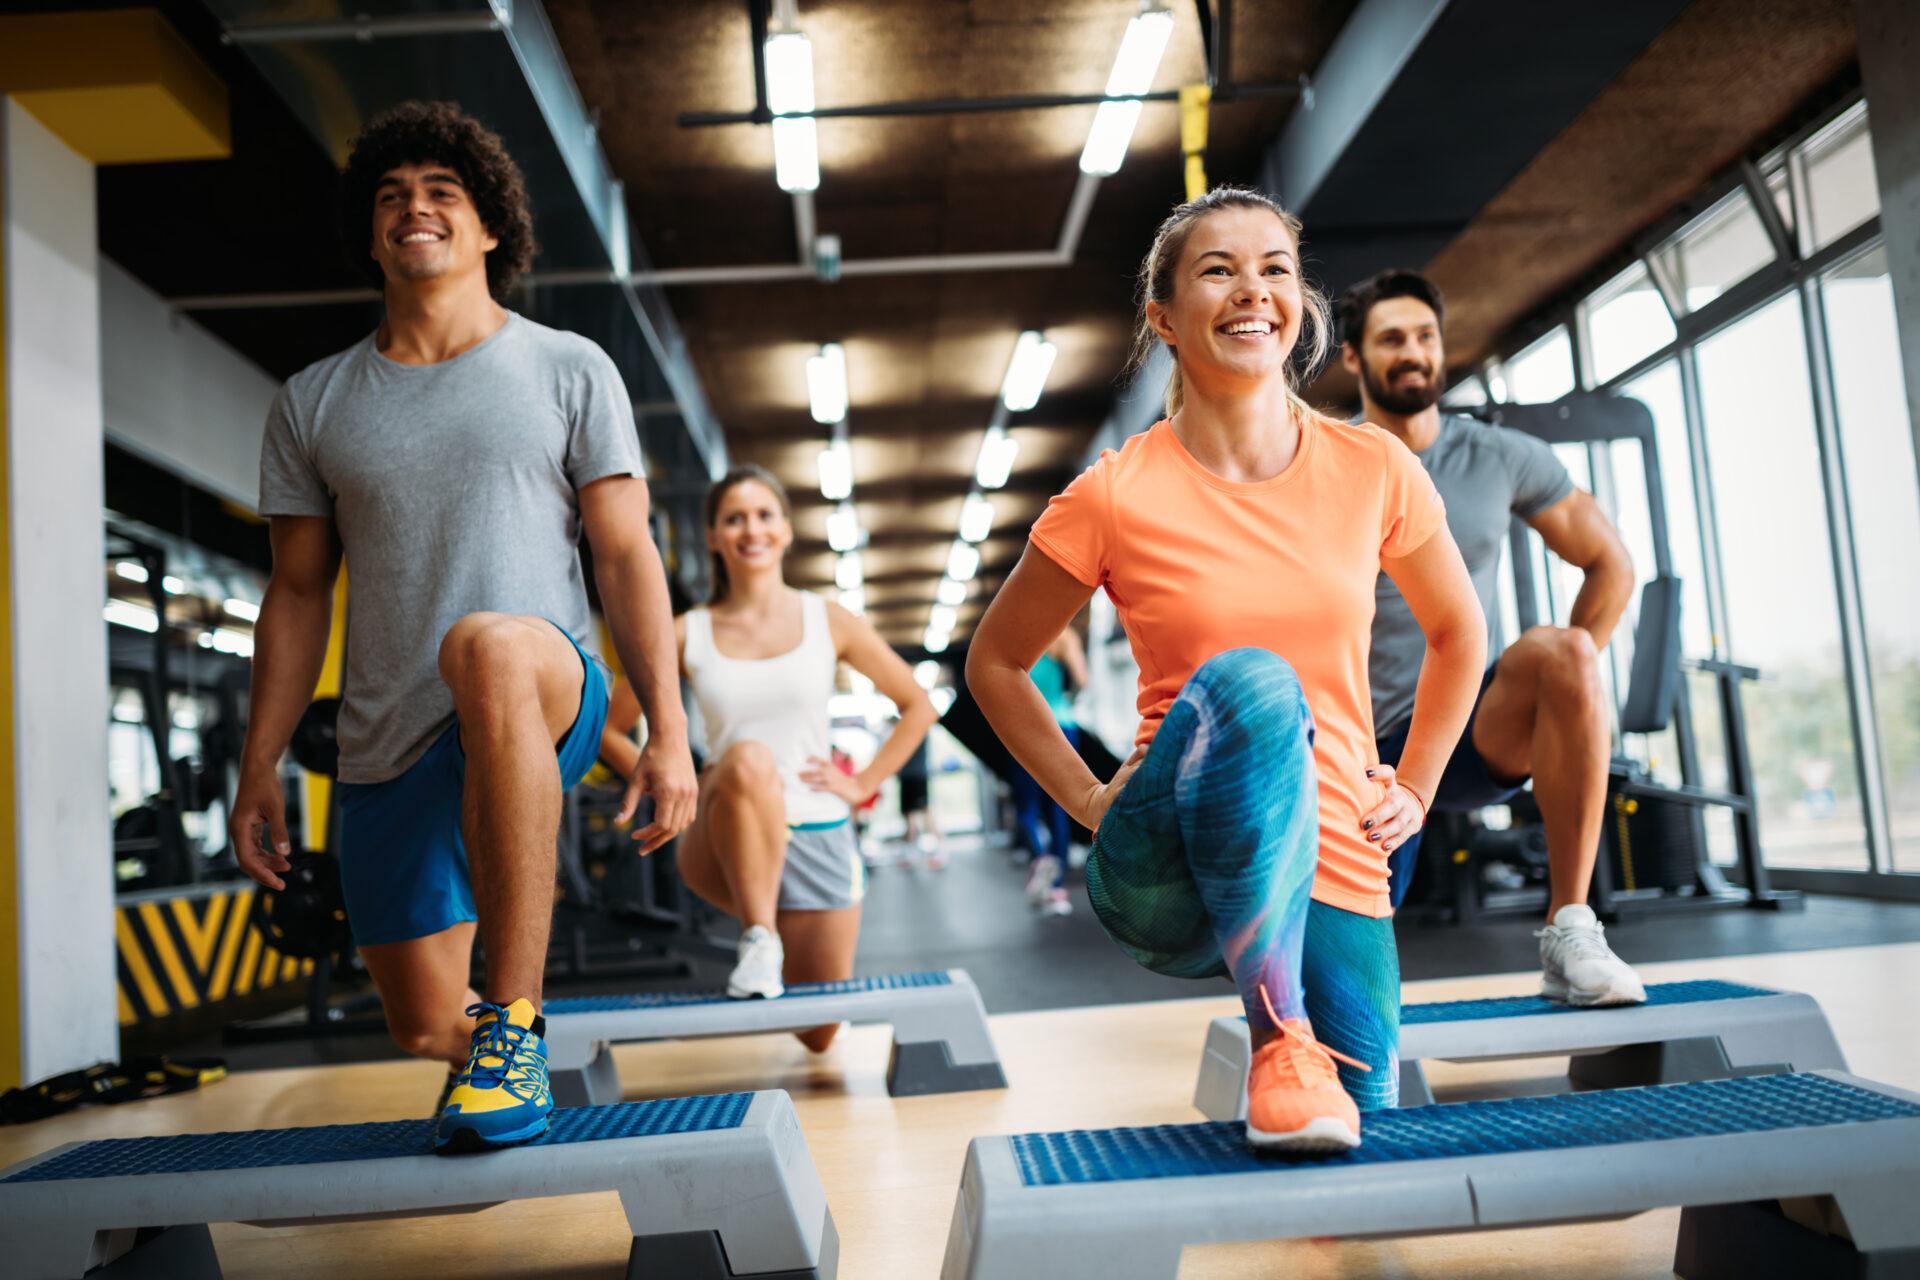 Jazzercise and ABC Fitness Partner to Offer Best-In-Class Member